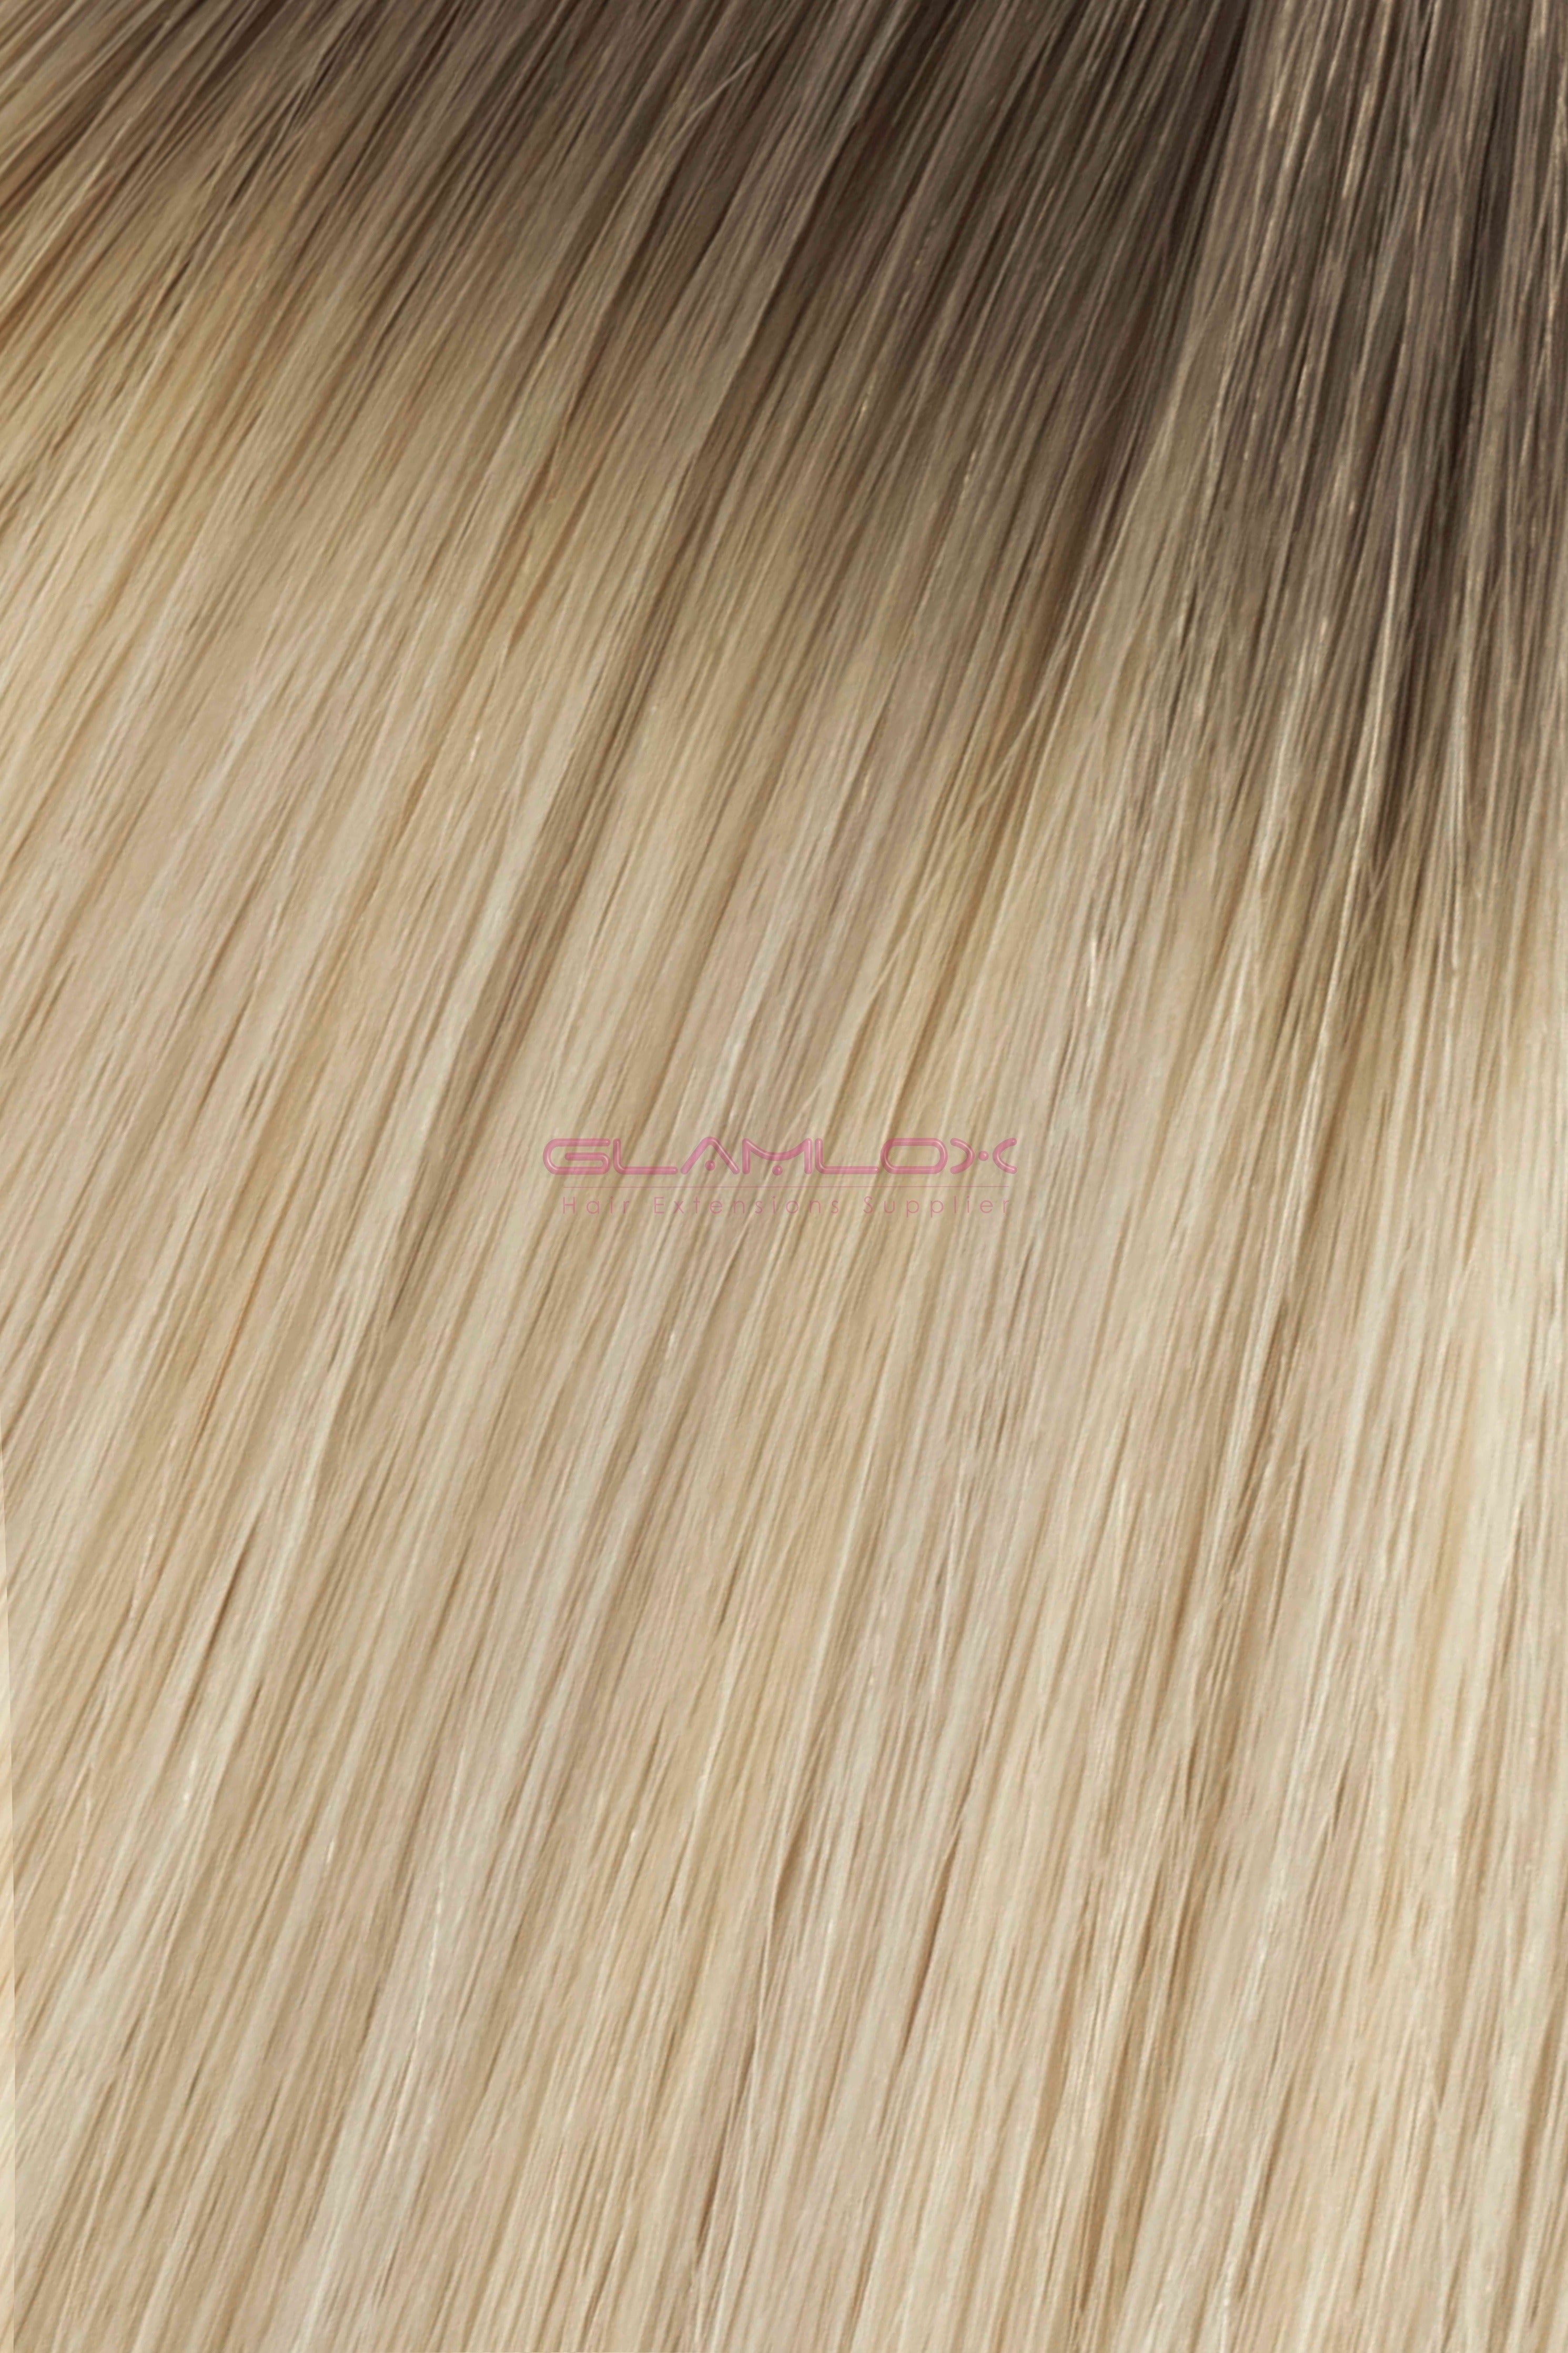 18" Half Weft Hair Extensions - Russian Mongolian Double Drawn Remy Human Hair